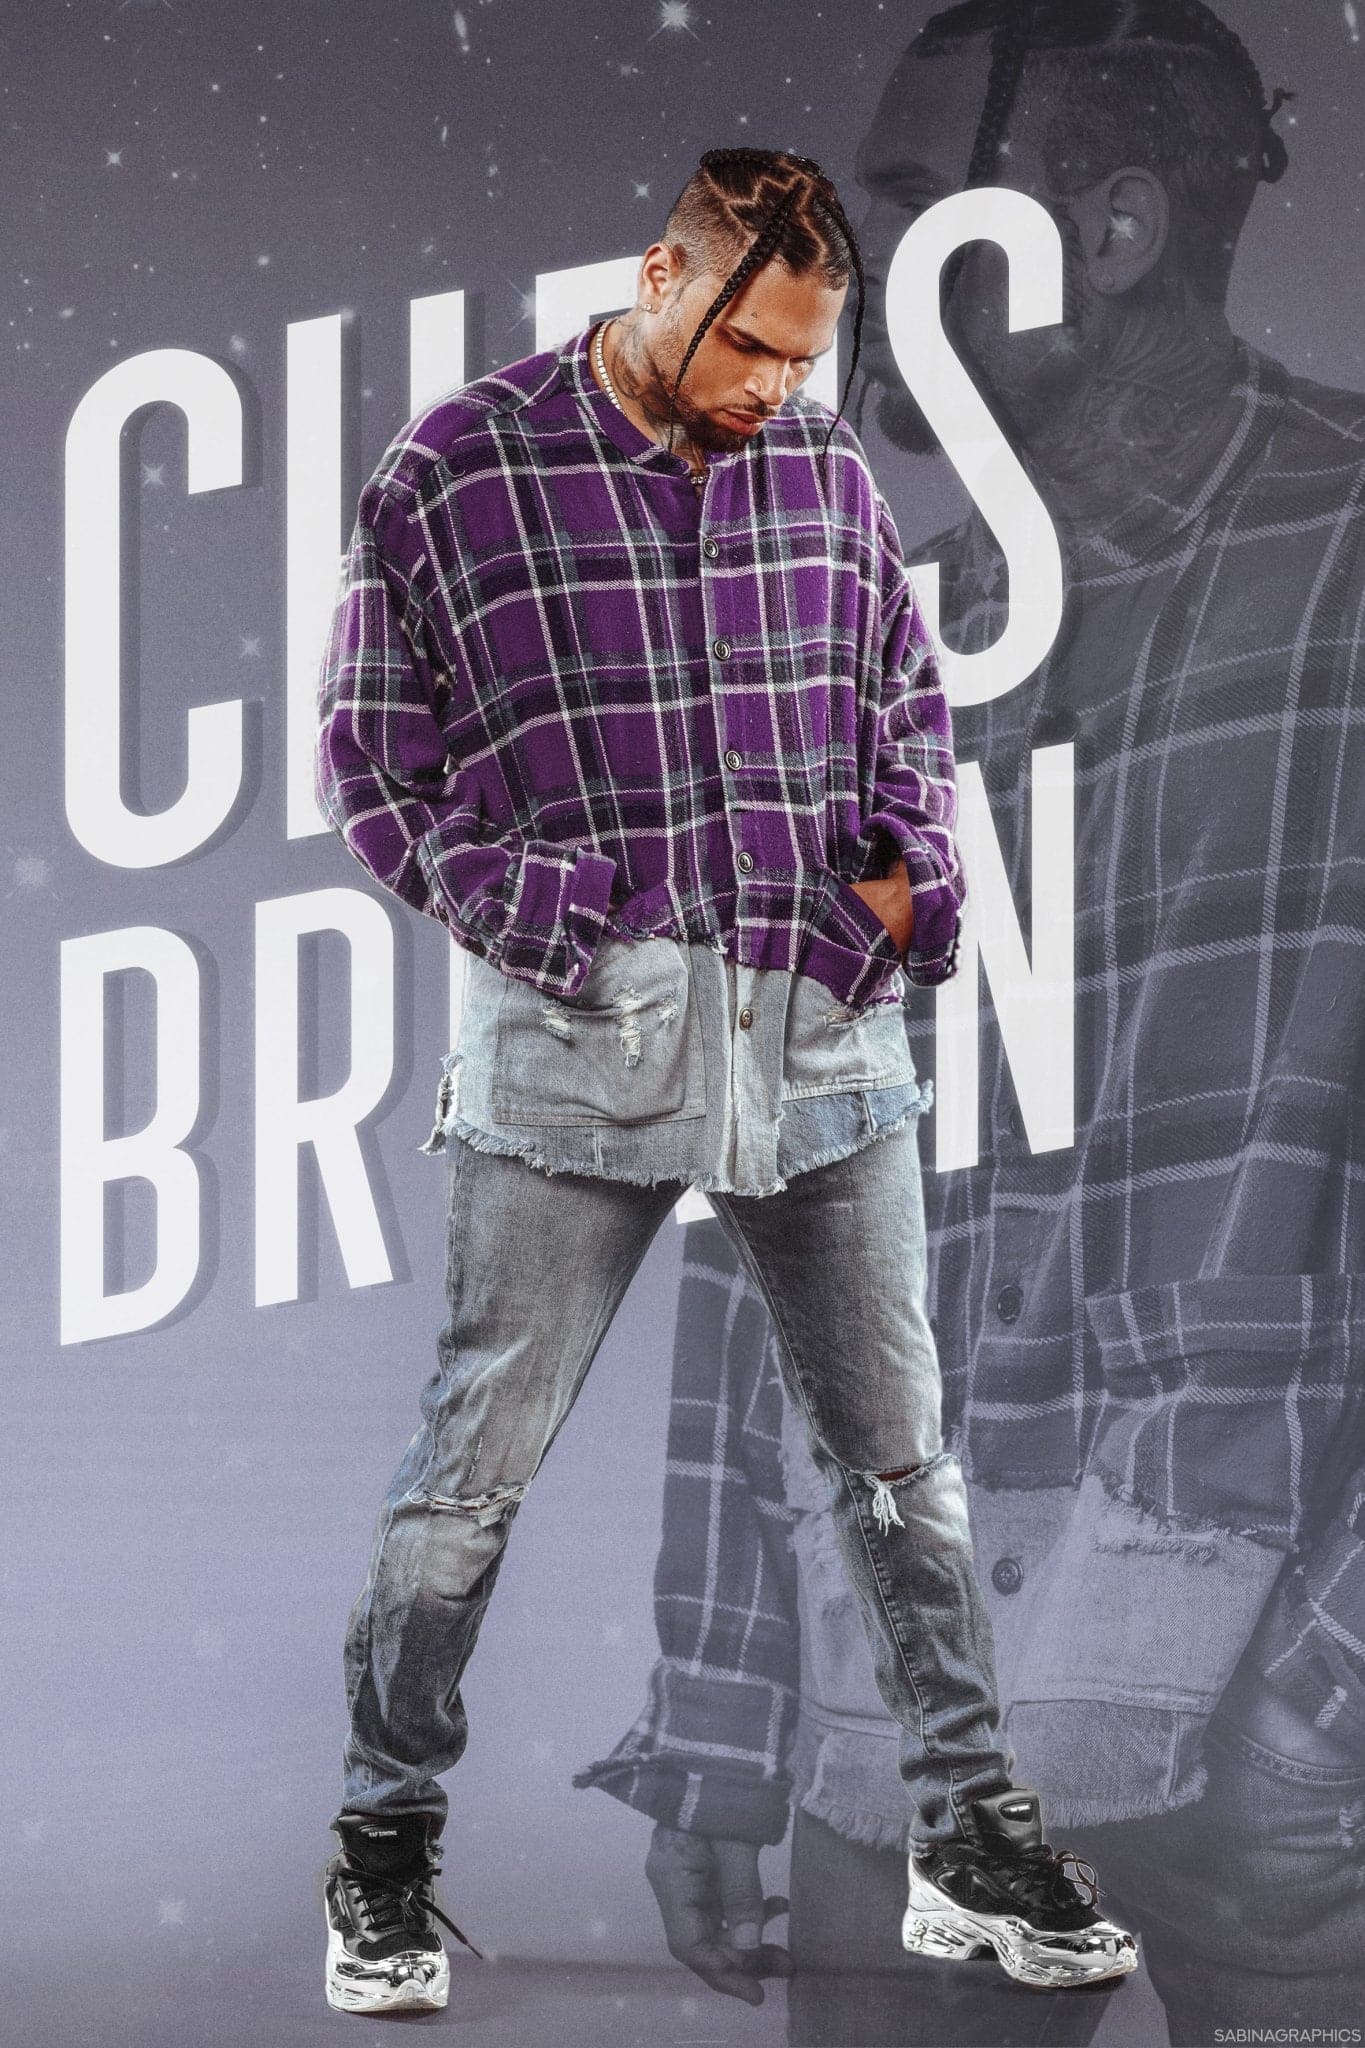 Chris Brown ‘Breezy’ Poster - Posters Plug